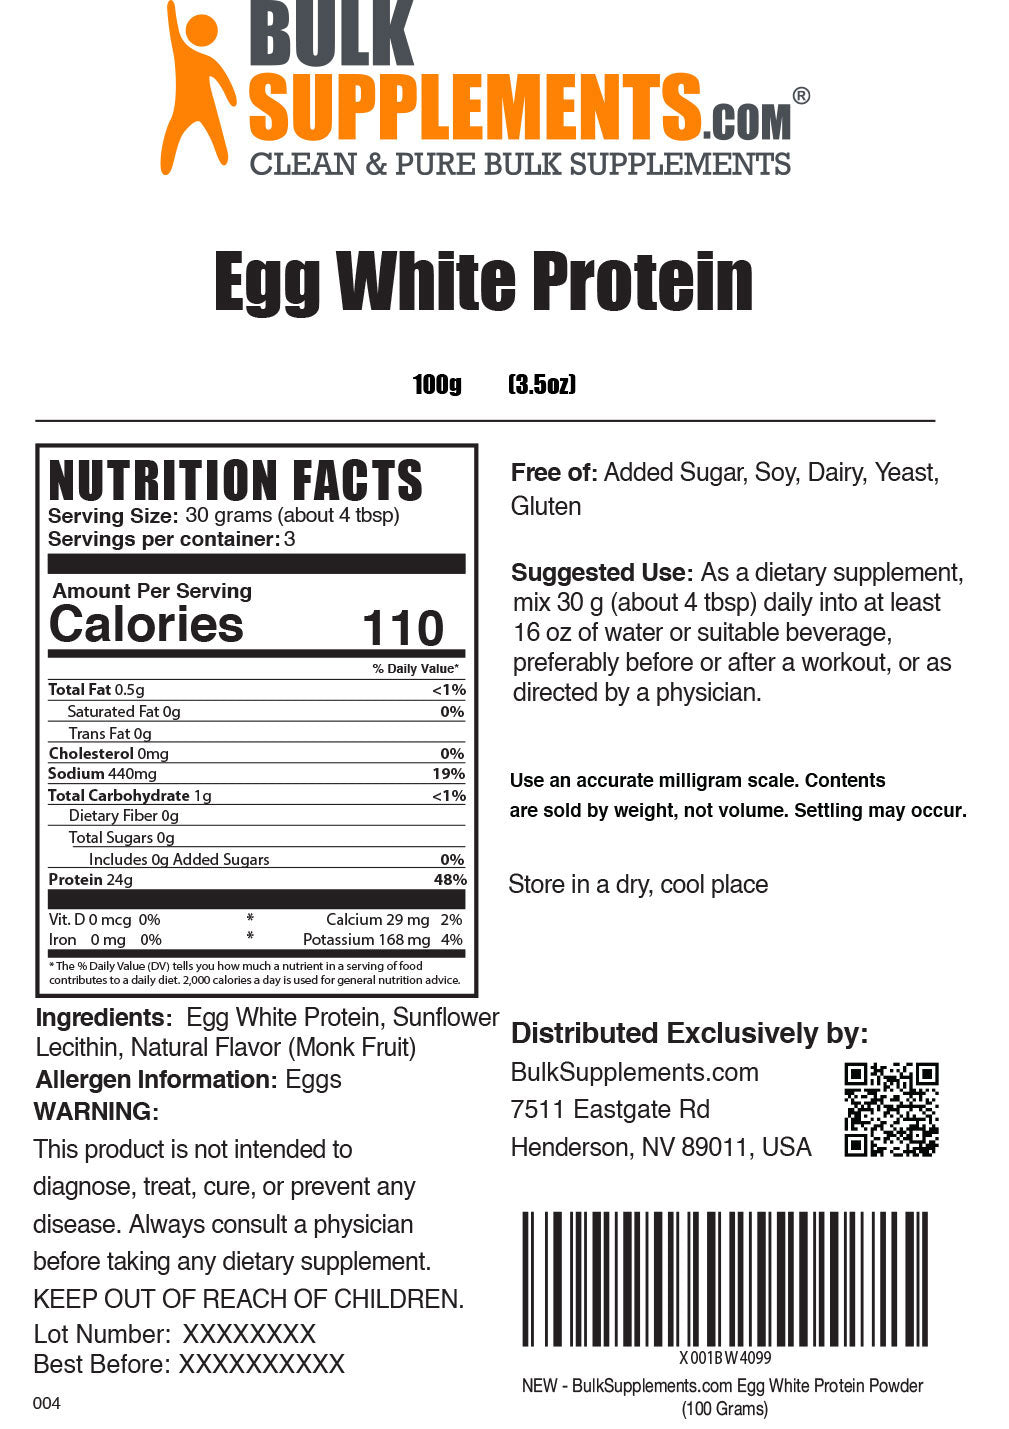 Egg White Protein 100g Nutrition Facts